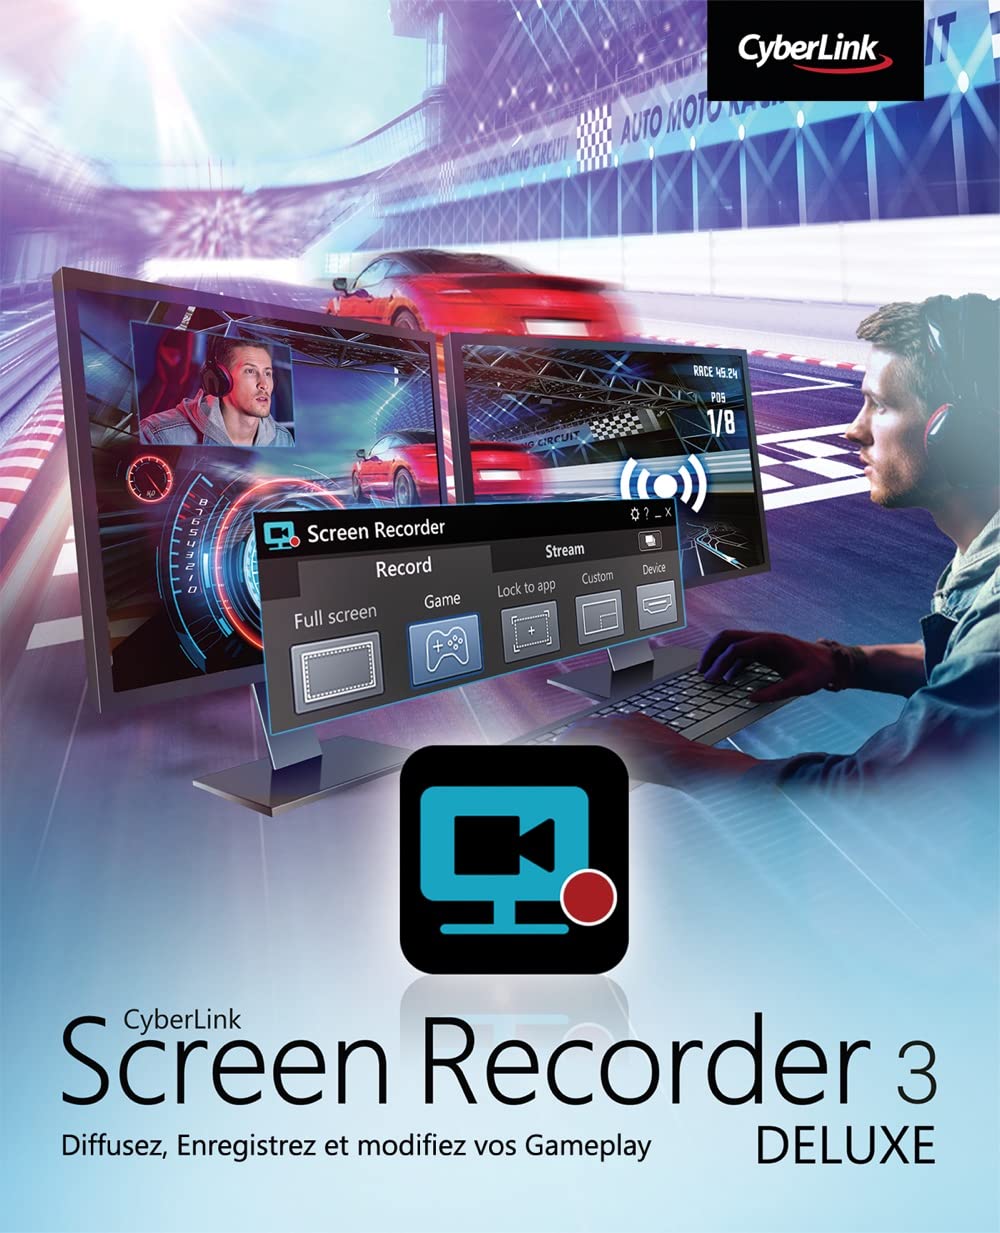 CyberLink Screen Recorder Deluxe 4.3.1.27955 instal the new